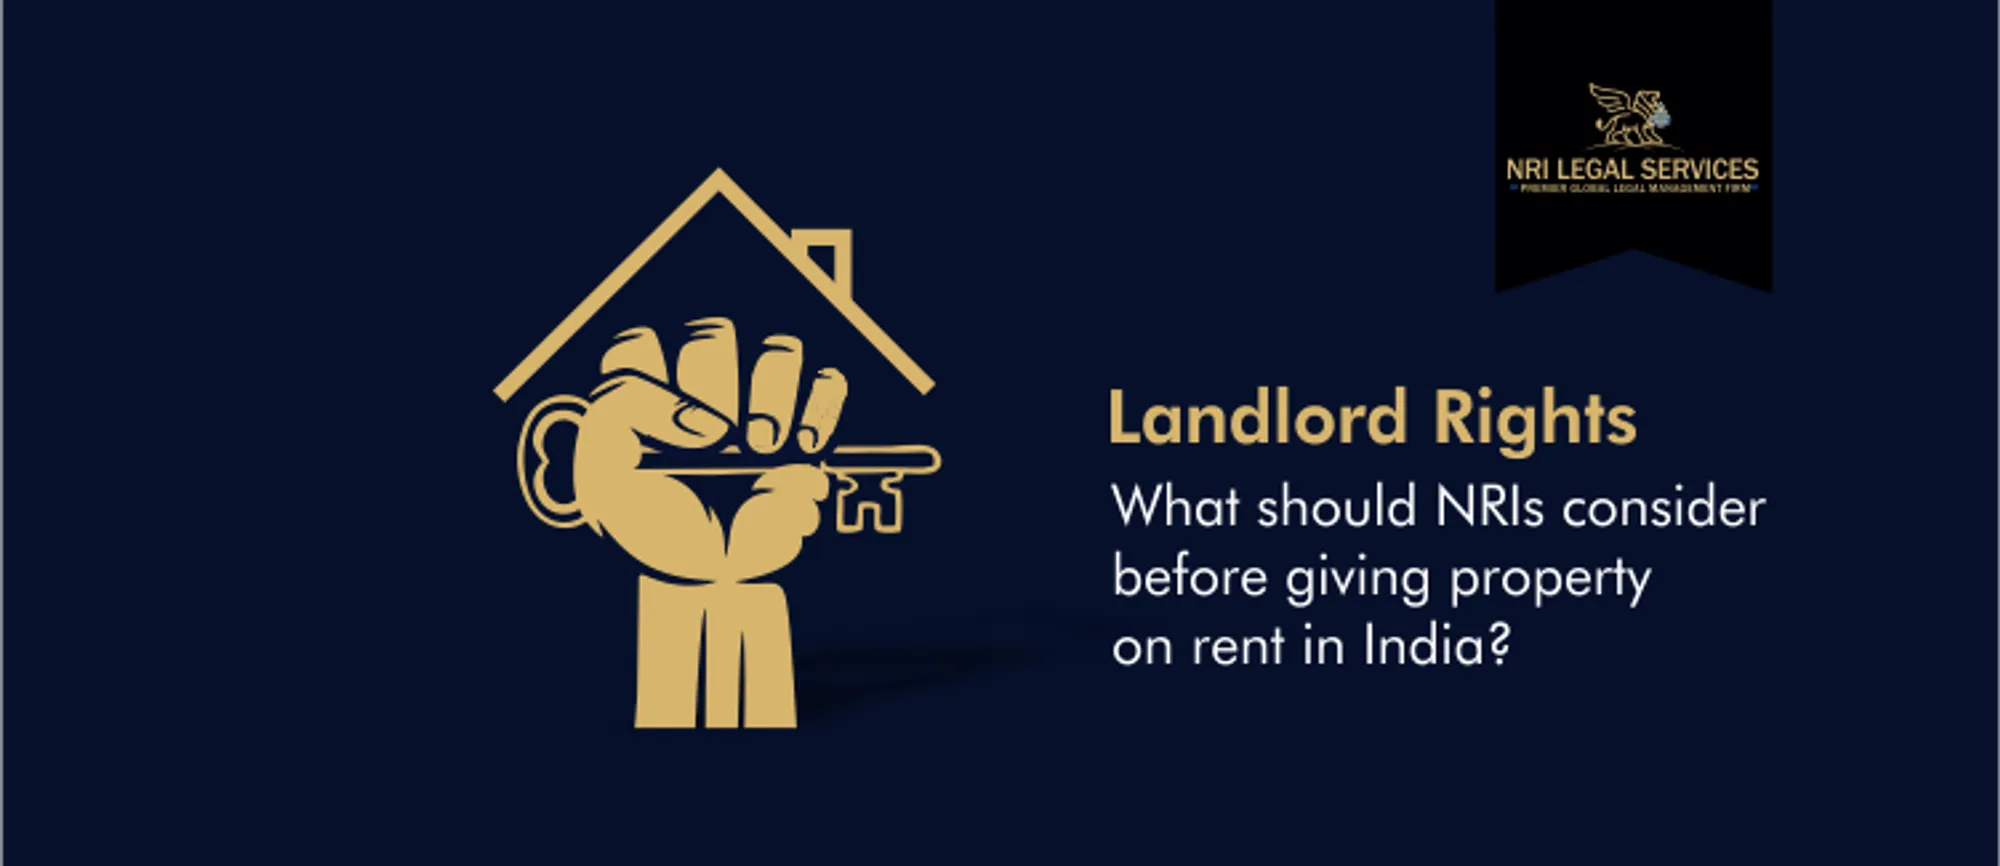 Landlord rights: What should NRIs consider before giving property on rent in India?